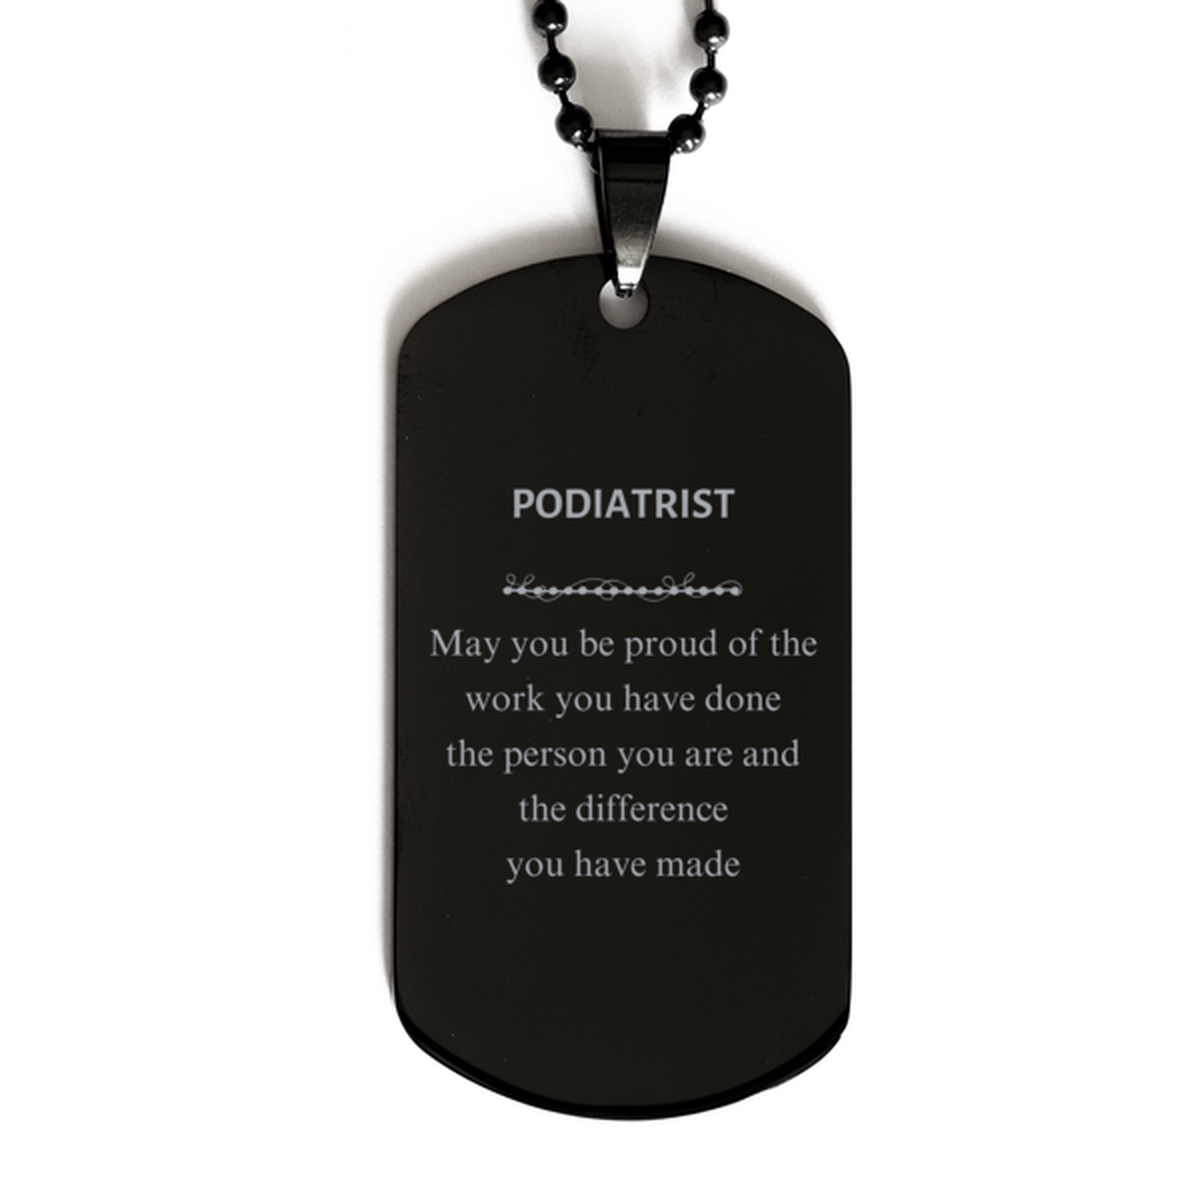 Podiatrist May you be proud of the work you have done, Retirement Podiatrist Black Dog Tag for Colleague Appreciation Gifts Amazing for Podiatrist